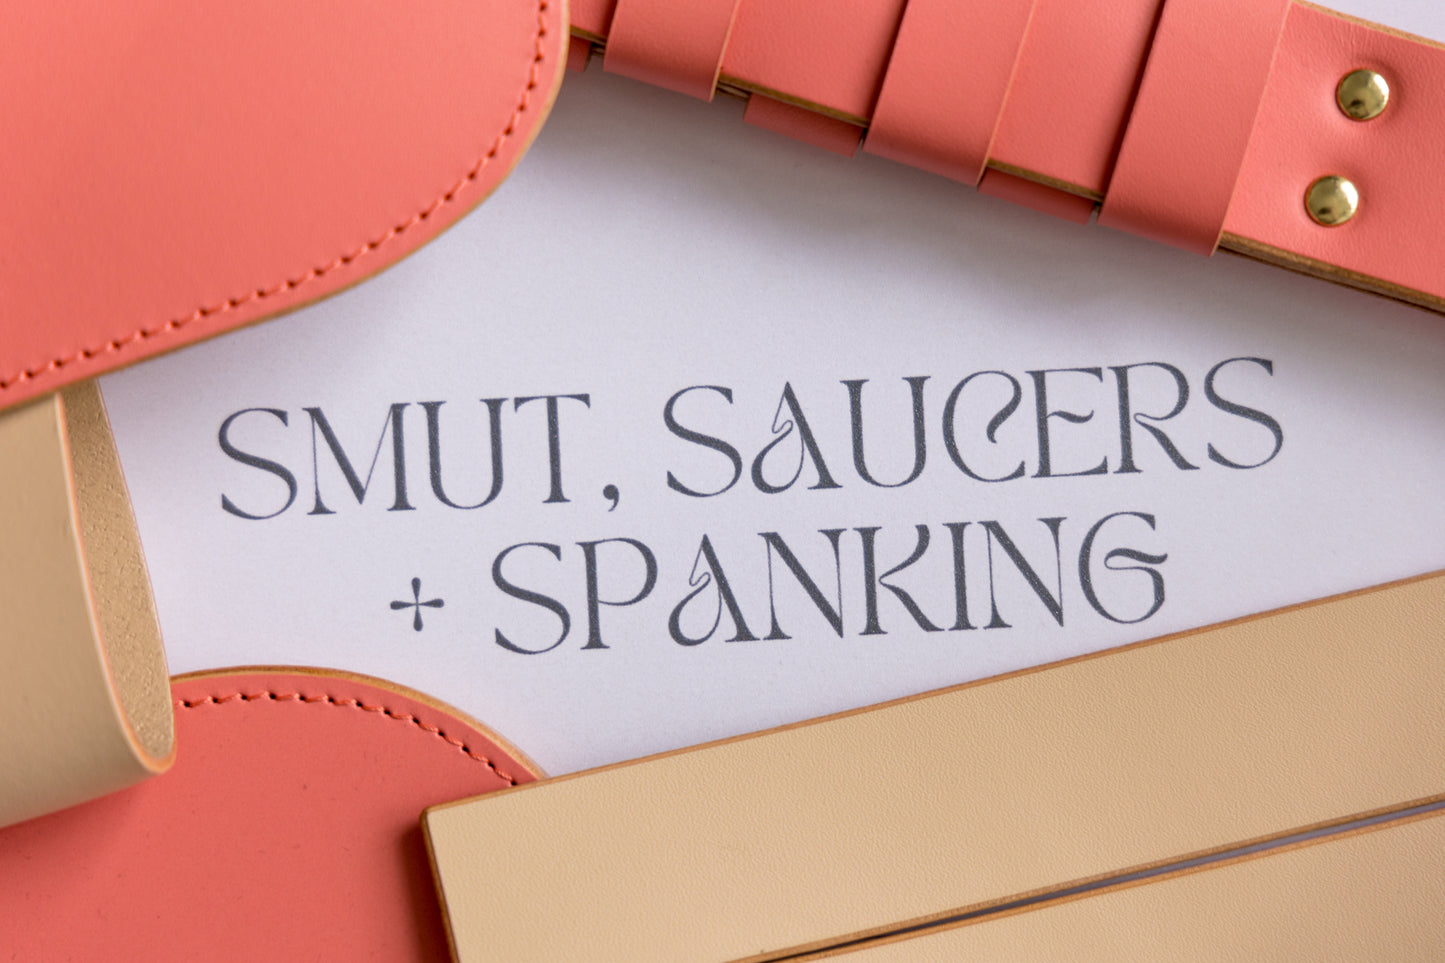 Smut, Saucers & Spanking Experience - 19.10.23 @7pm